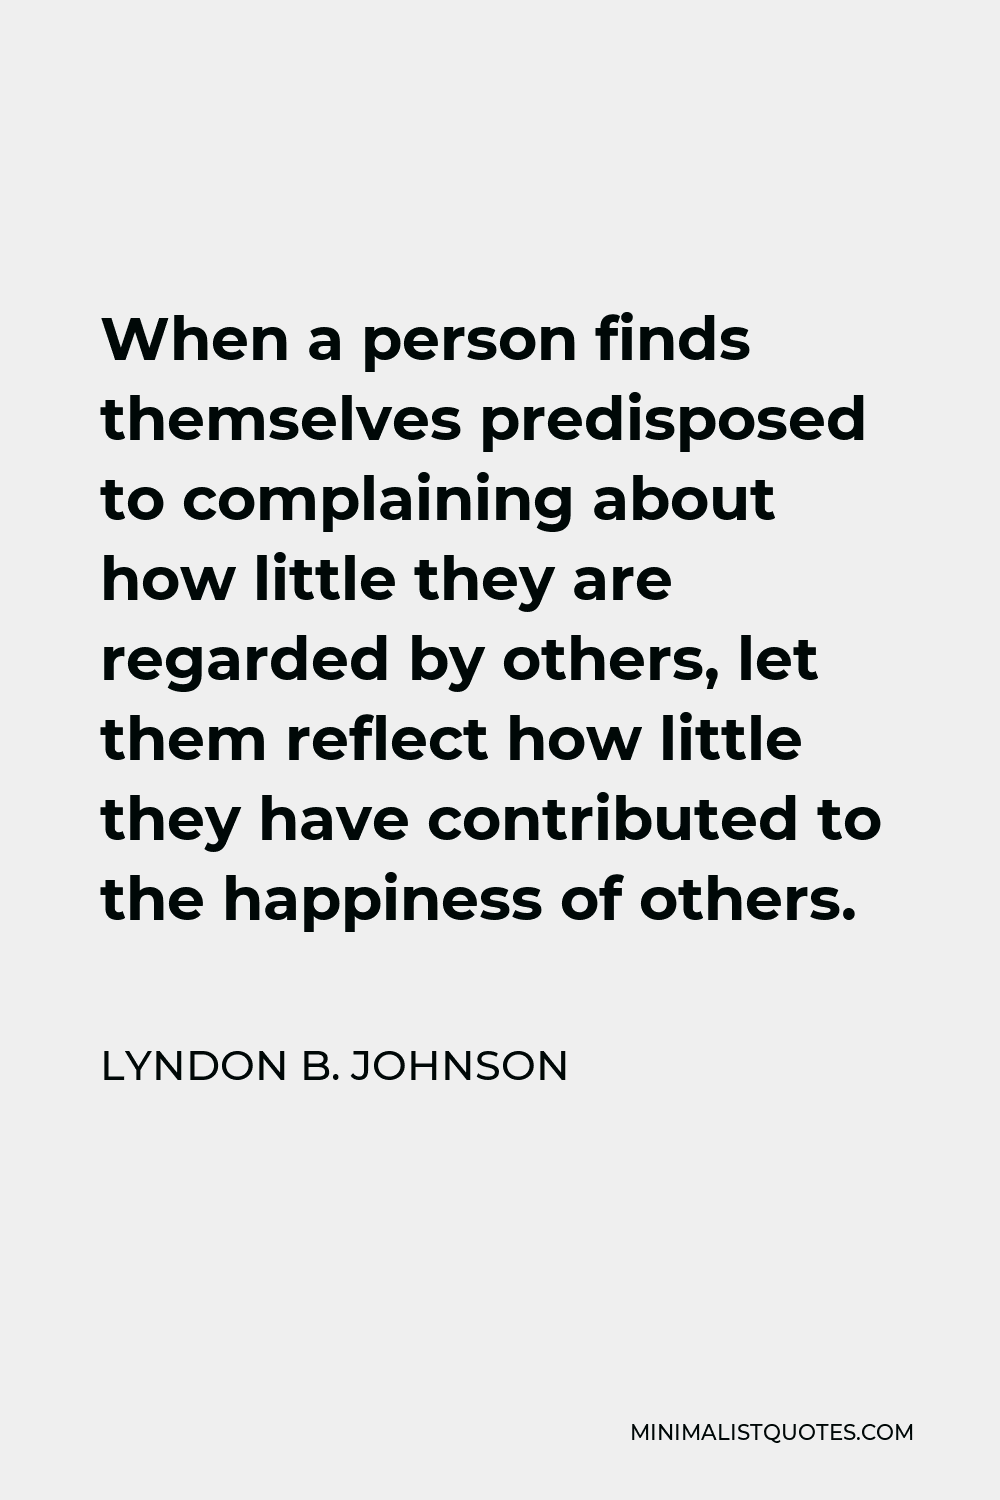 Lyndon B. Johnson Quote - When a person finds themselves predisposed to complaining about how little they are regarded by others, let them reflect how little they have contributed to the happiness of others.